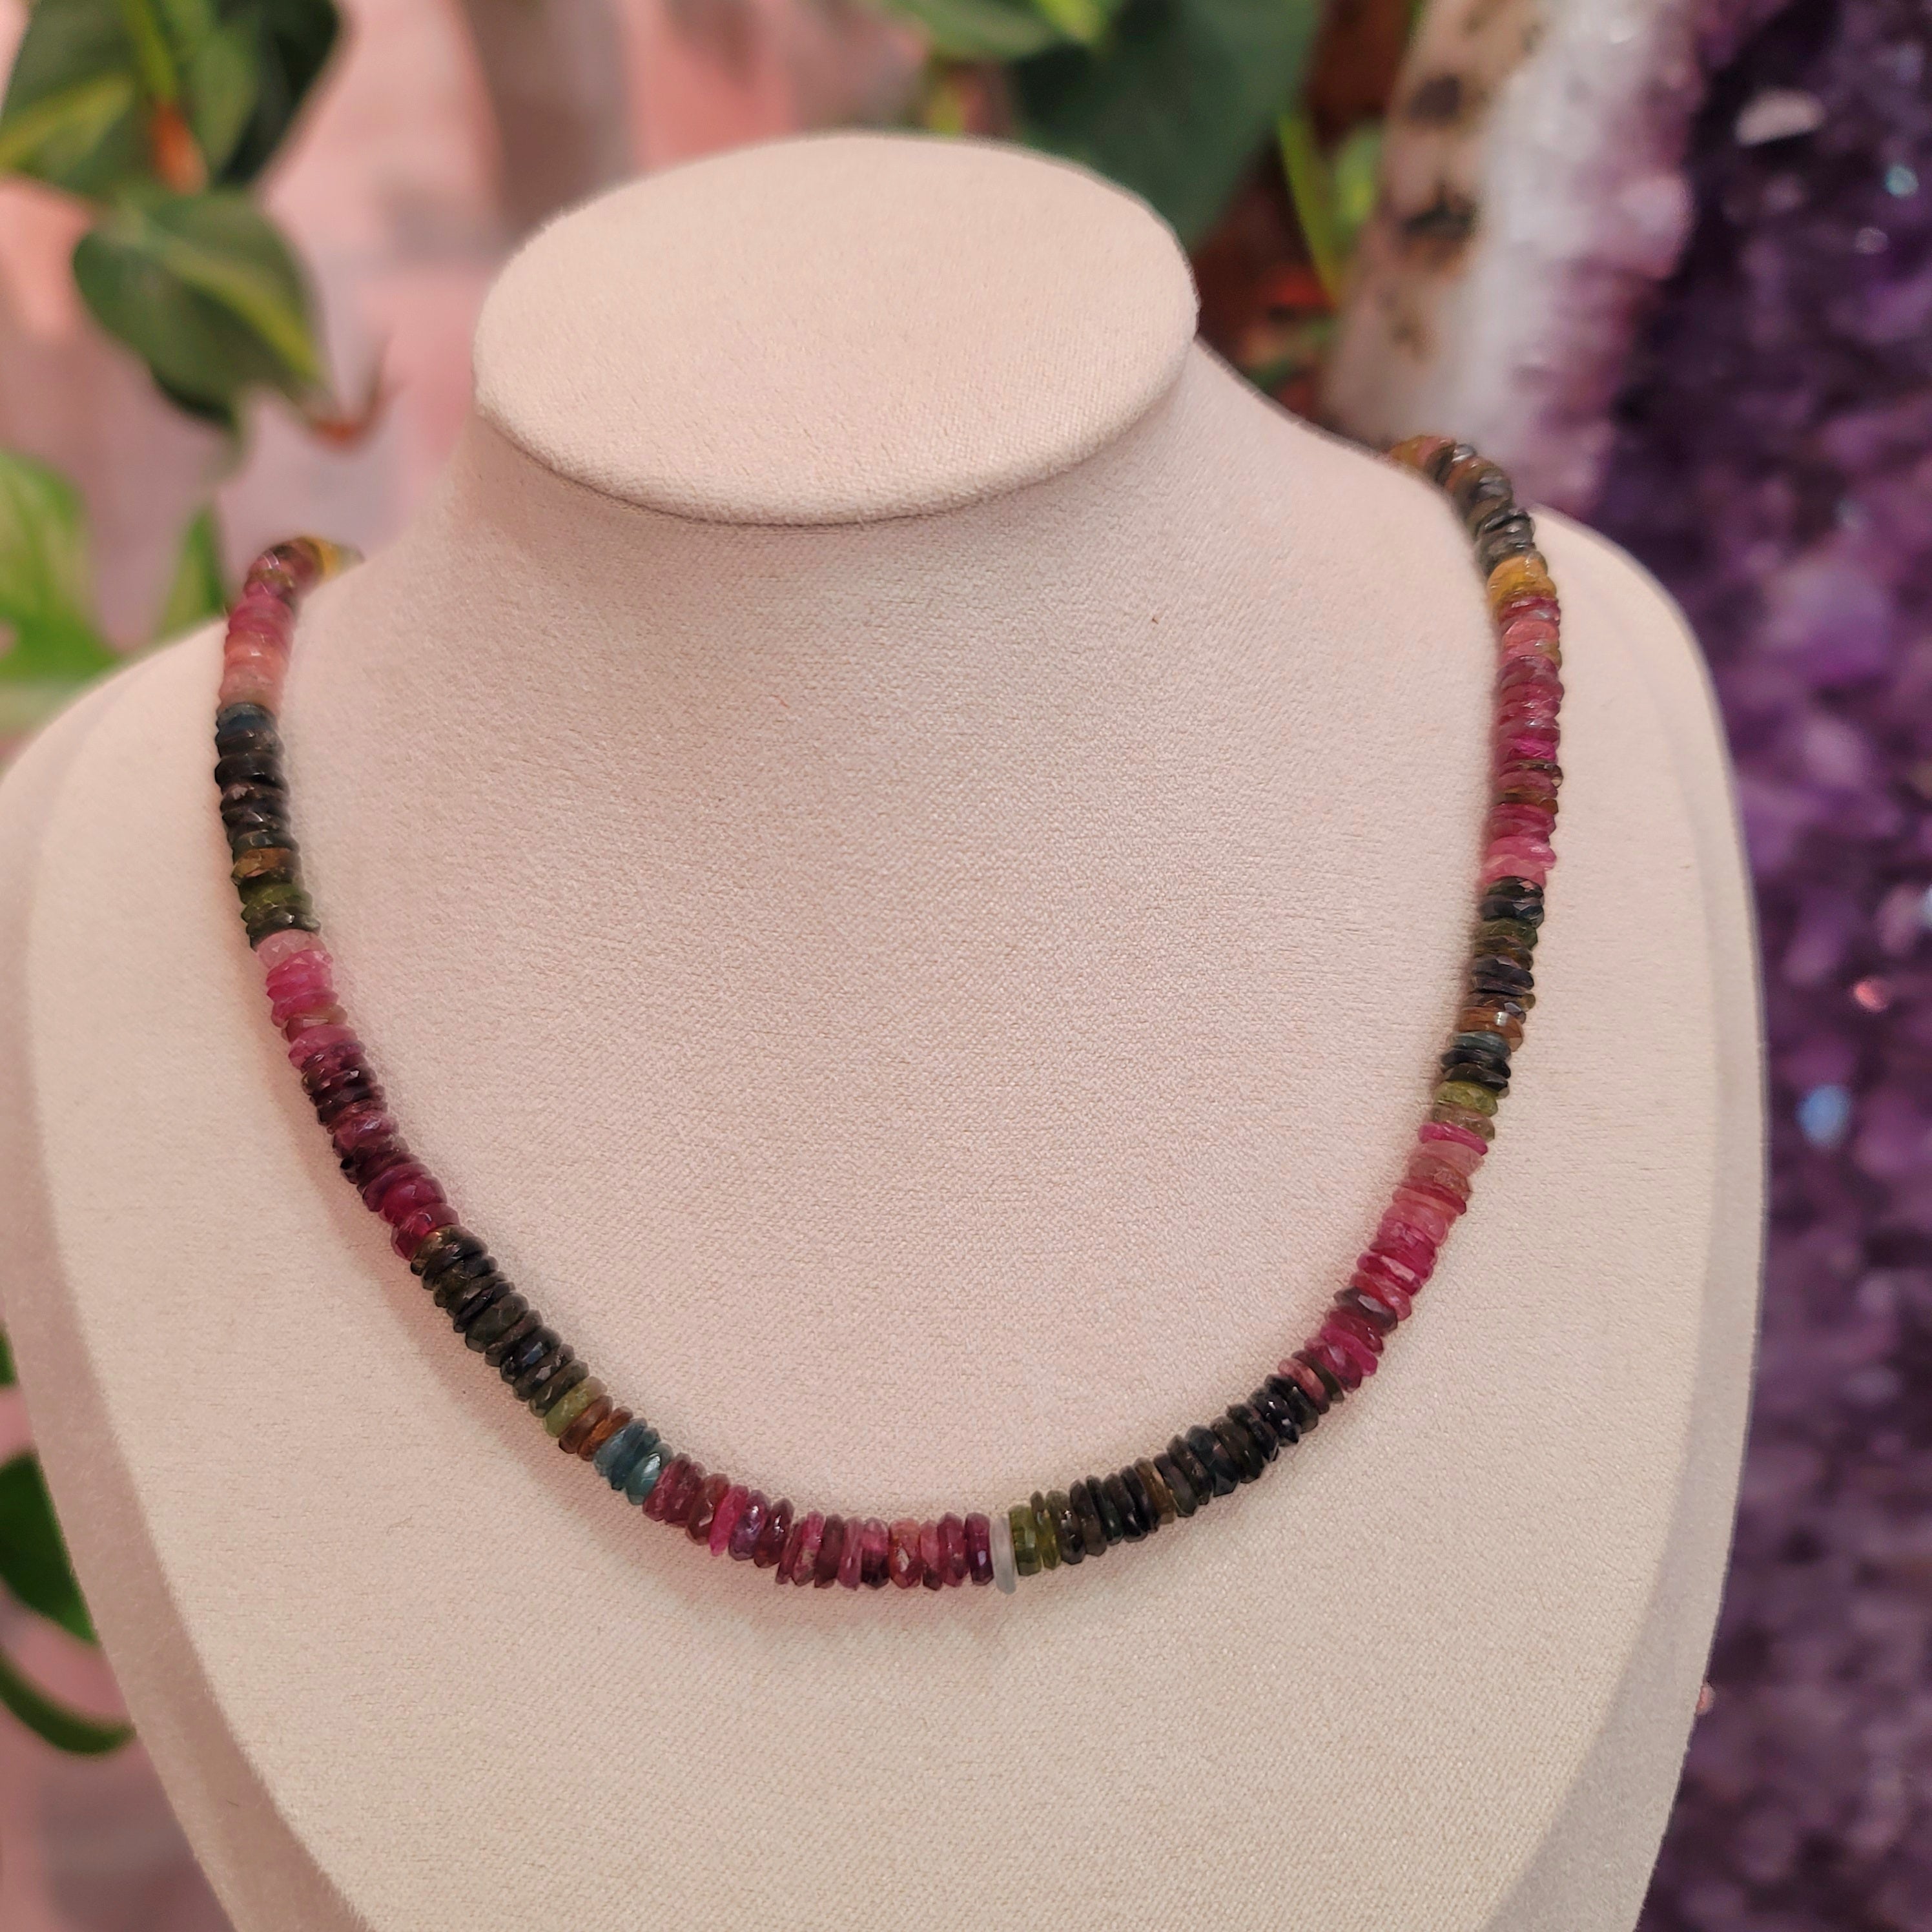 Watermelon Tourmaline Faceted Necklace for Profound Heart Healing